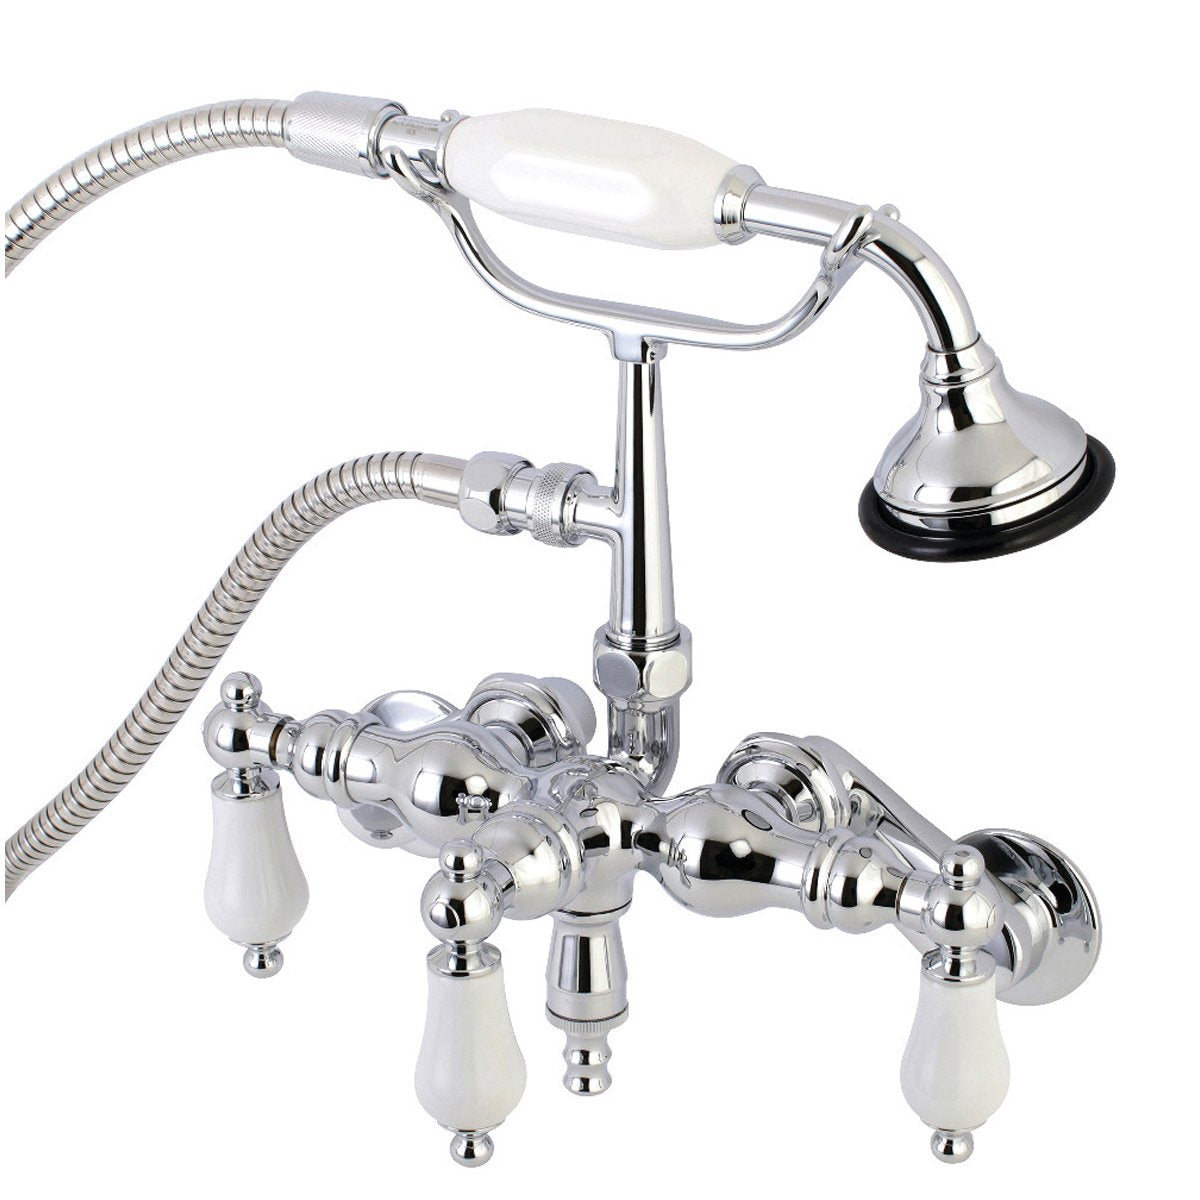 Kingston Brass AE421TX-P Aqua Vintage 3-3/8-Inch Adjustable Wall Mount Clawfoot Tub Faucet with Hand Shower